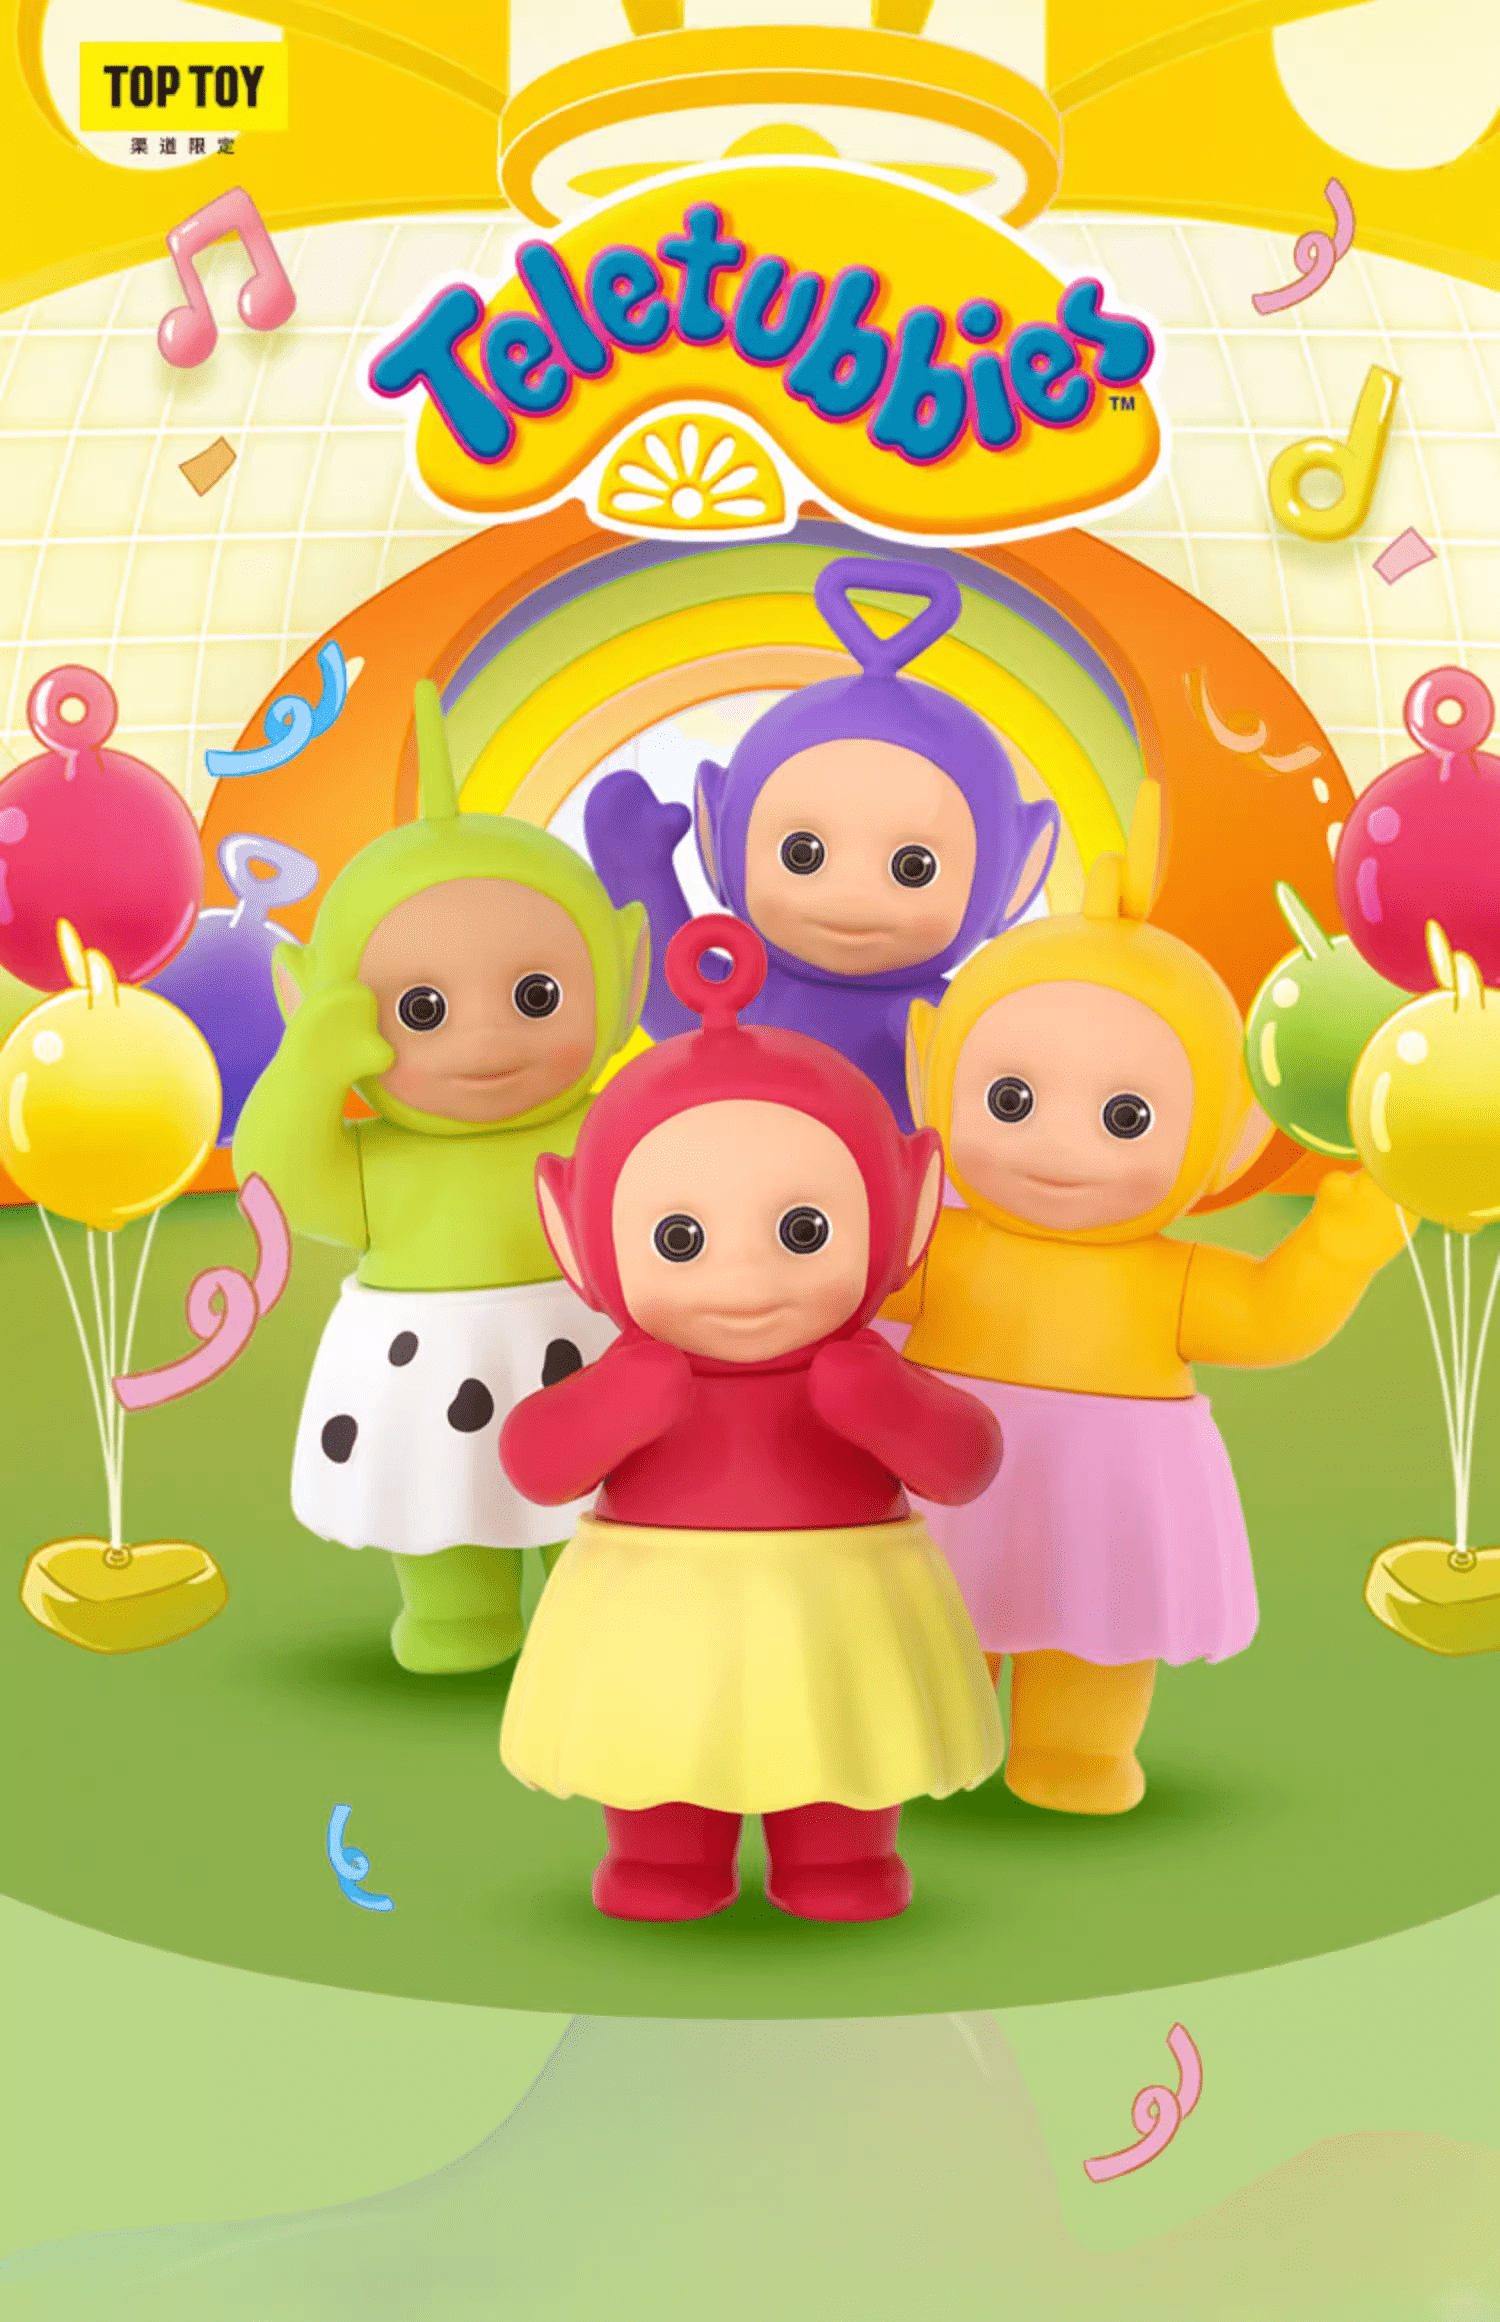 Moetch TELETUBBIES PARTY SERIES MUSIC BOX